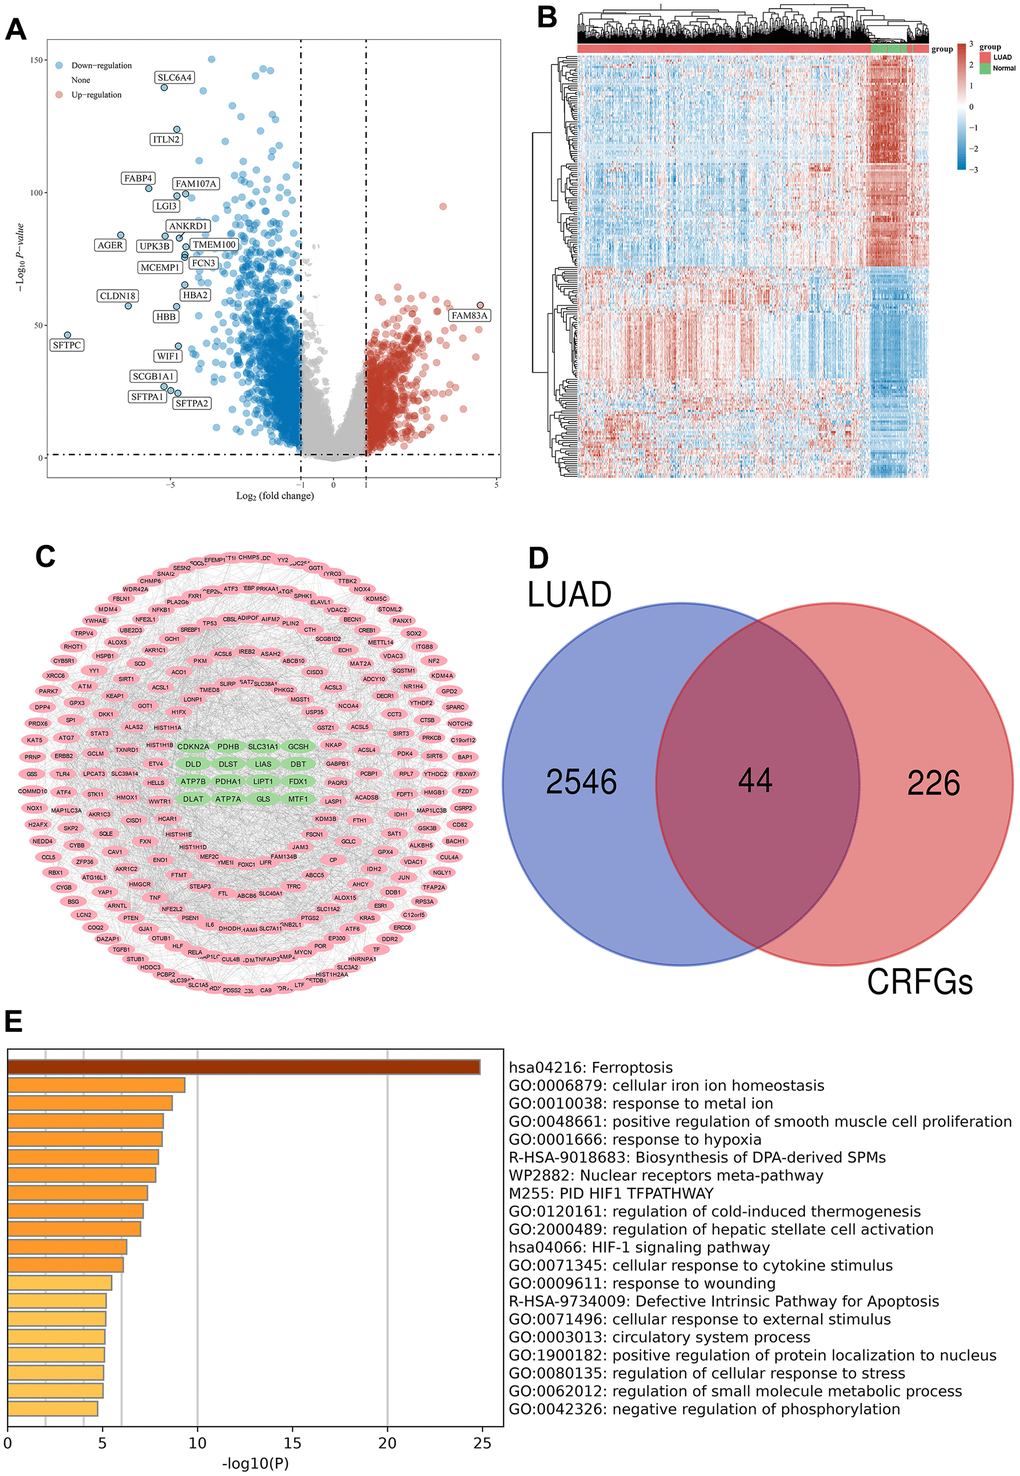 Acquisition and enrichment analysis of LUAD-related CRFGs. (A) Volcano plot, blue dots indicate genes significantly down-regulated in expression in LUAD samples compared to normal samples, and red dots indicate genes significantly up-regulated. (B) Heat map. (C) PPI network diagram of CRFGs, ferroptosis-related genes are shown with pink nodes and green nodes representing cuproptosis-related genes. (D) Venn diagram constructed by LUAD and CRFGs. (E) GO and KEGG enrichment analysis of LUAD-related CRFGs, with the longer columns representing higher enrichment.